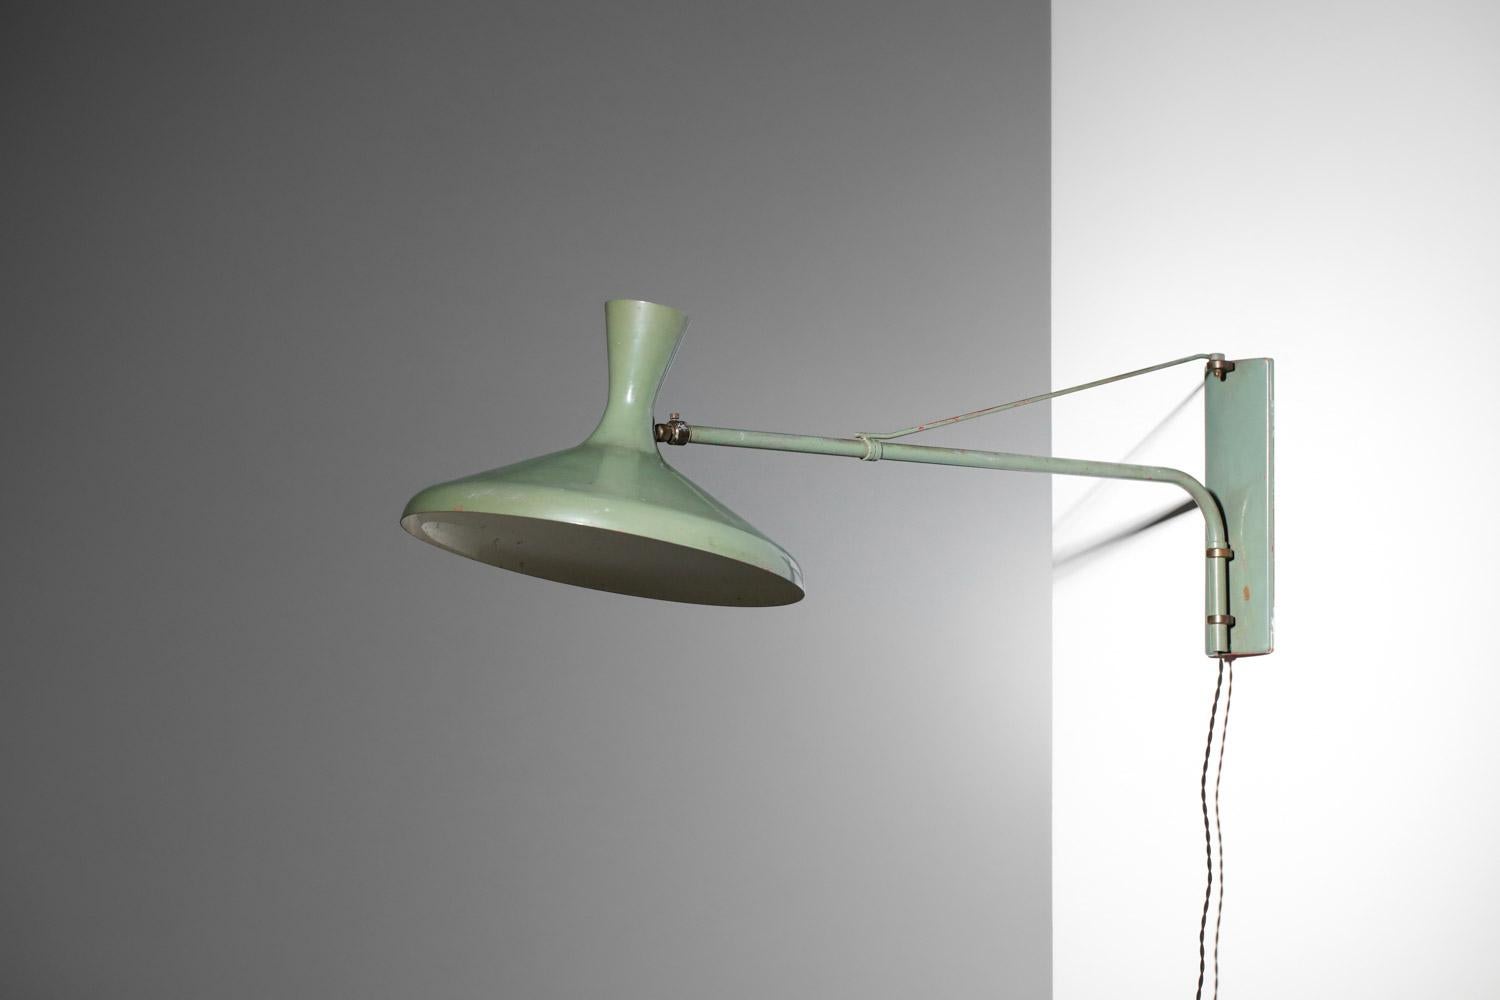 Italian industrial style bracket from the 50s. Structure of wall lamp and shade in lacquered metal (originally painted and re-lacquered in the past).  The lampshade can be rotated into different positions thanks to the central ball-and-socket joint.